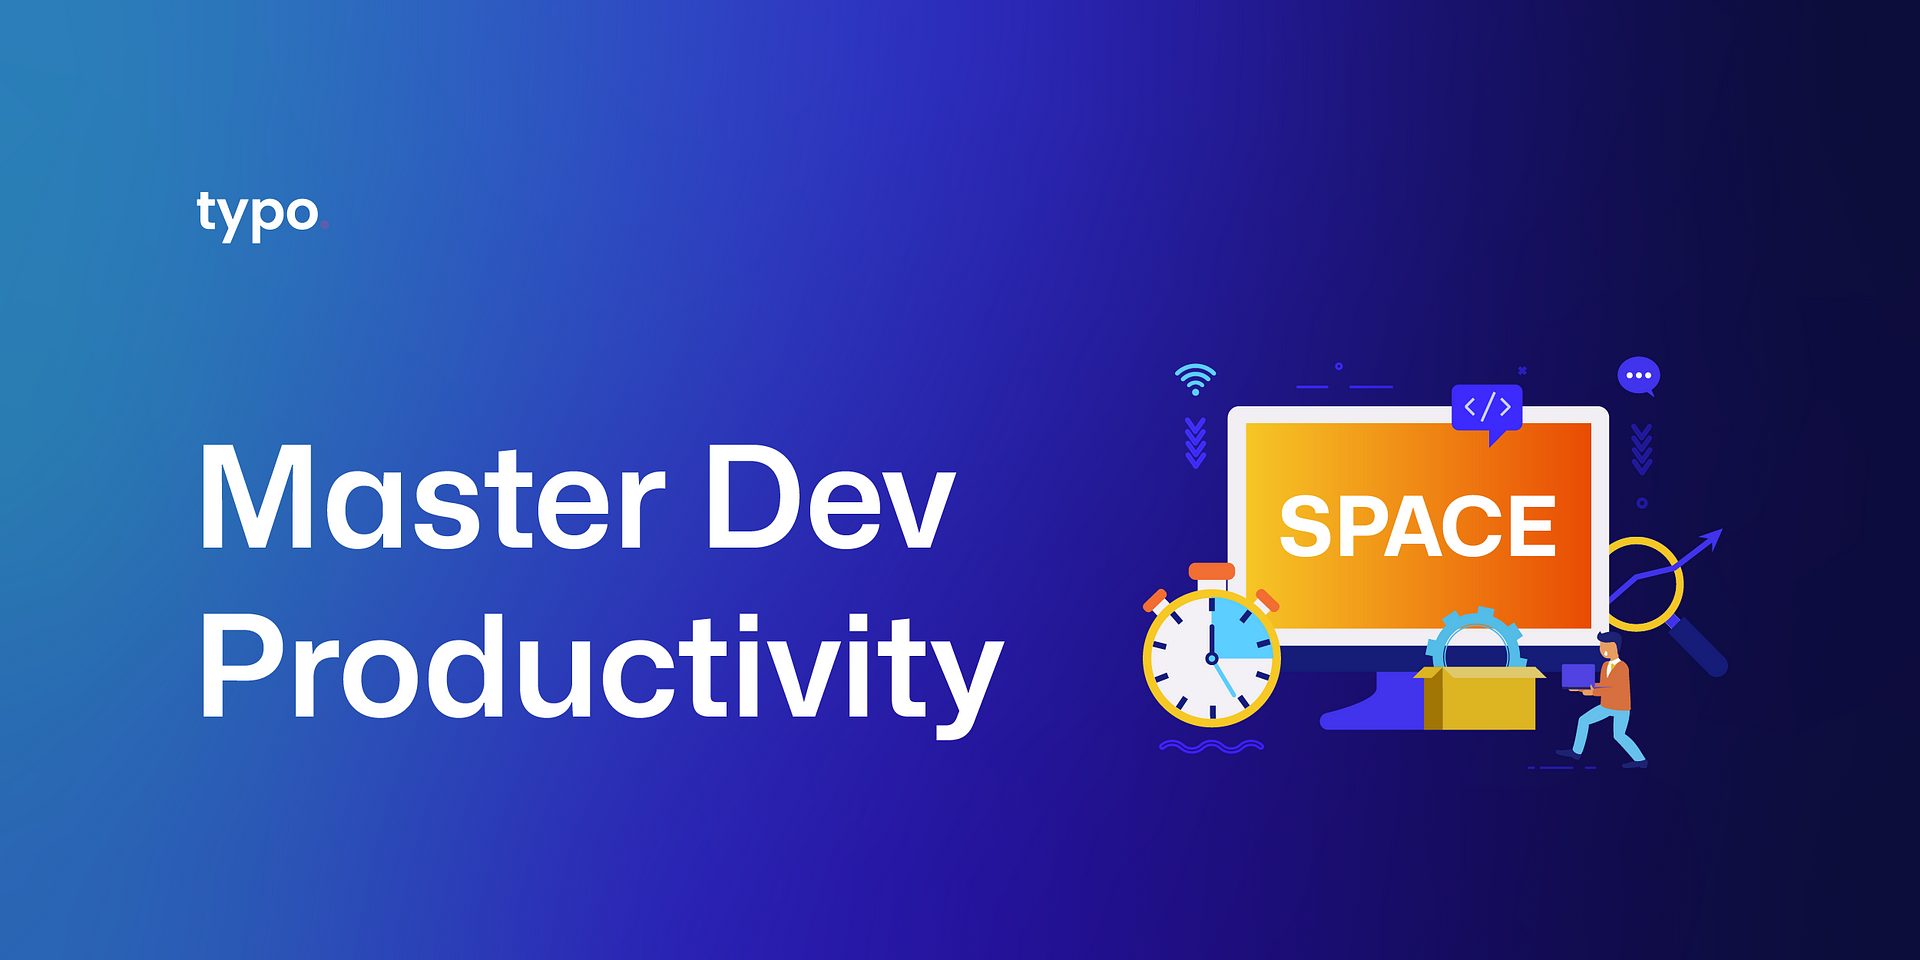 Mastering Developer Productivity with the SPACE Framework